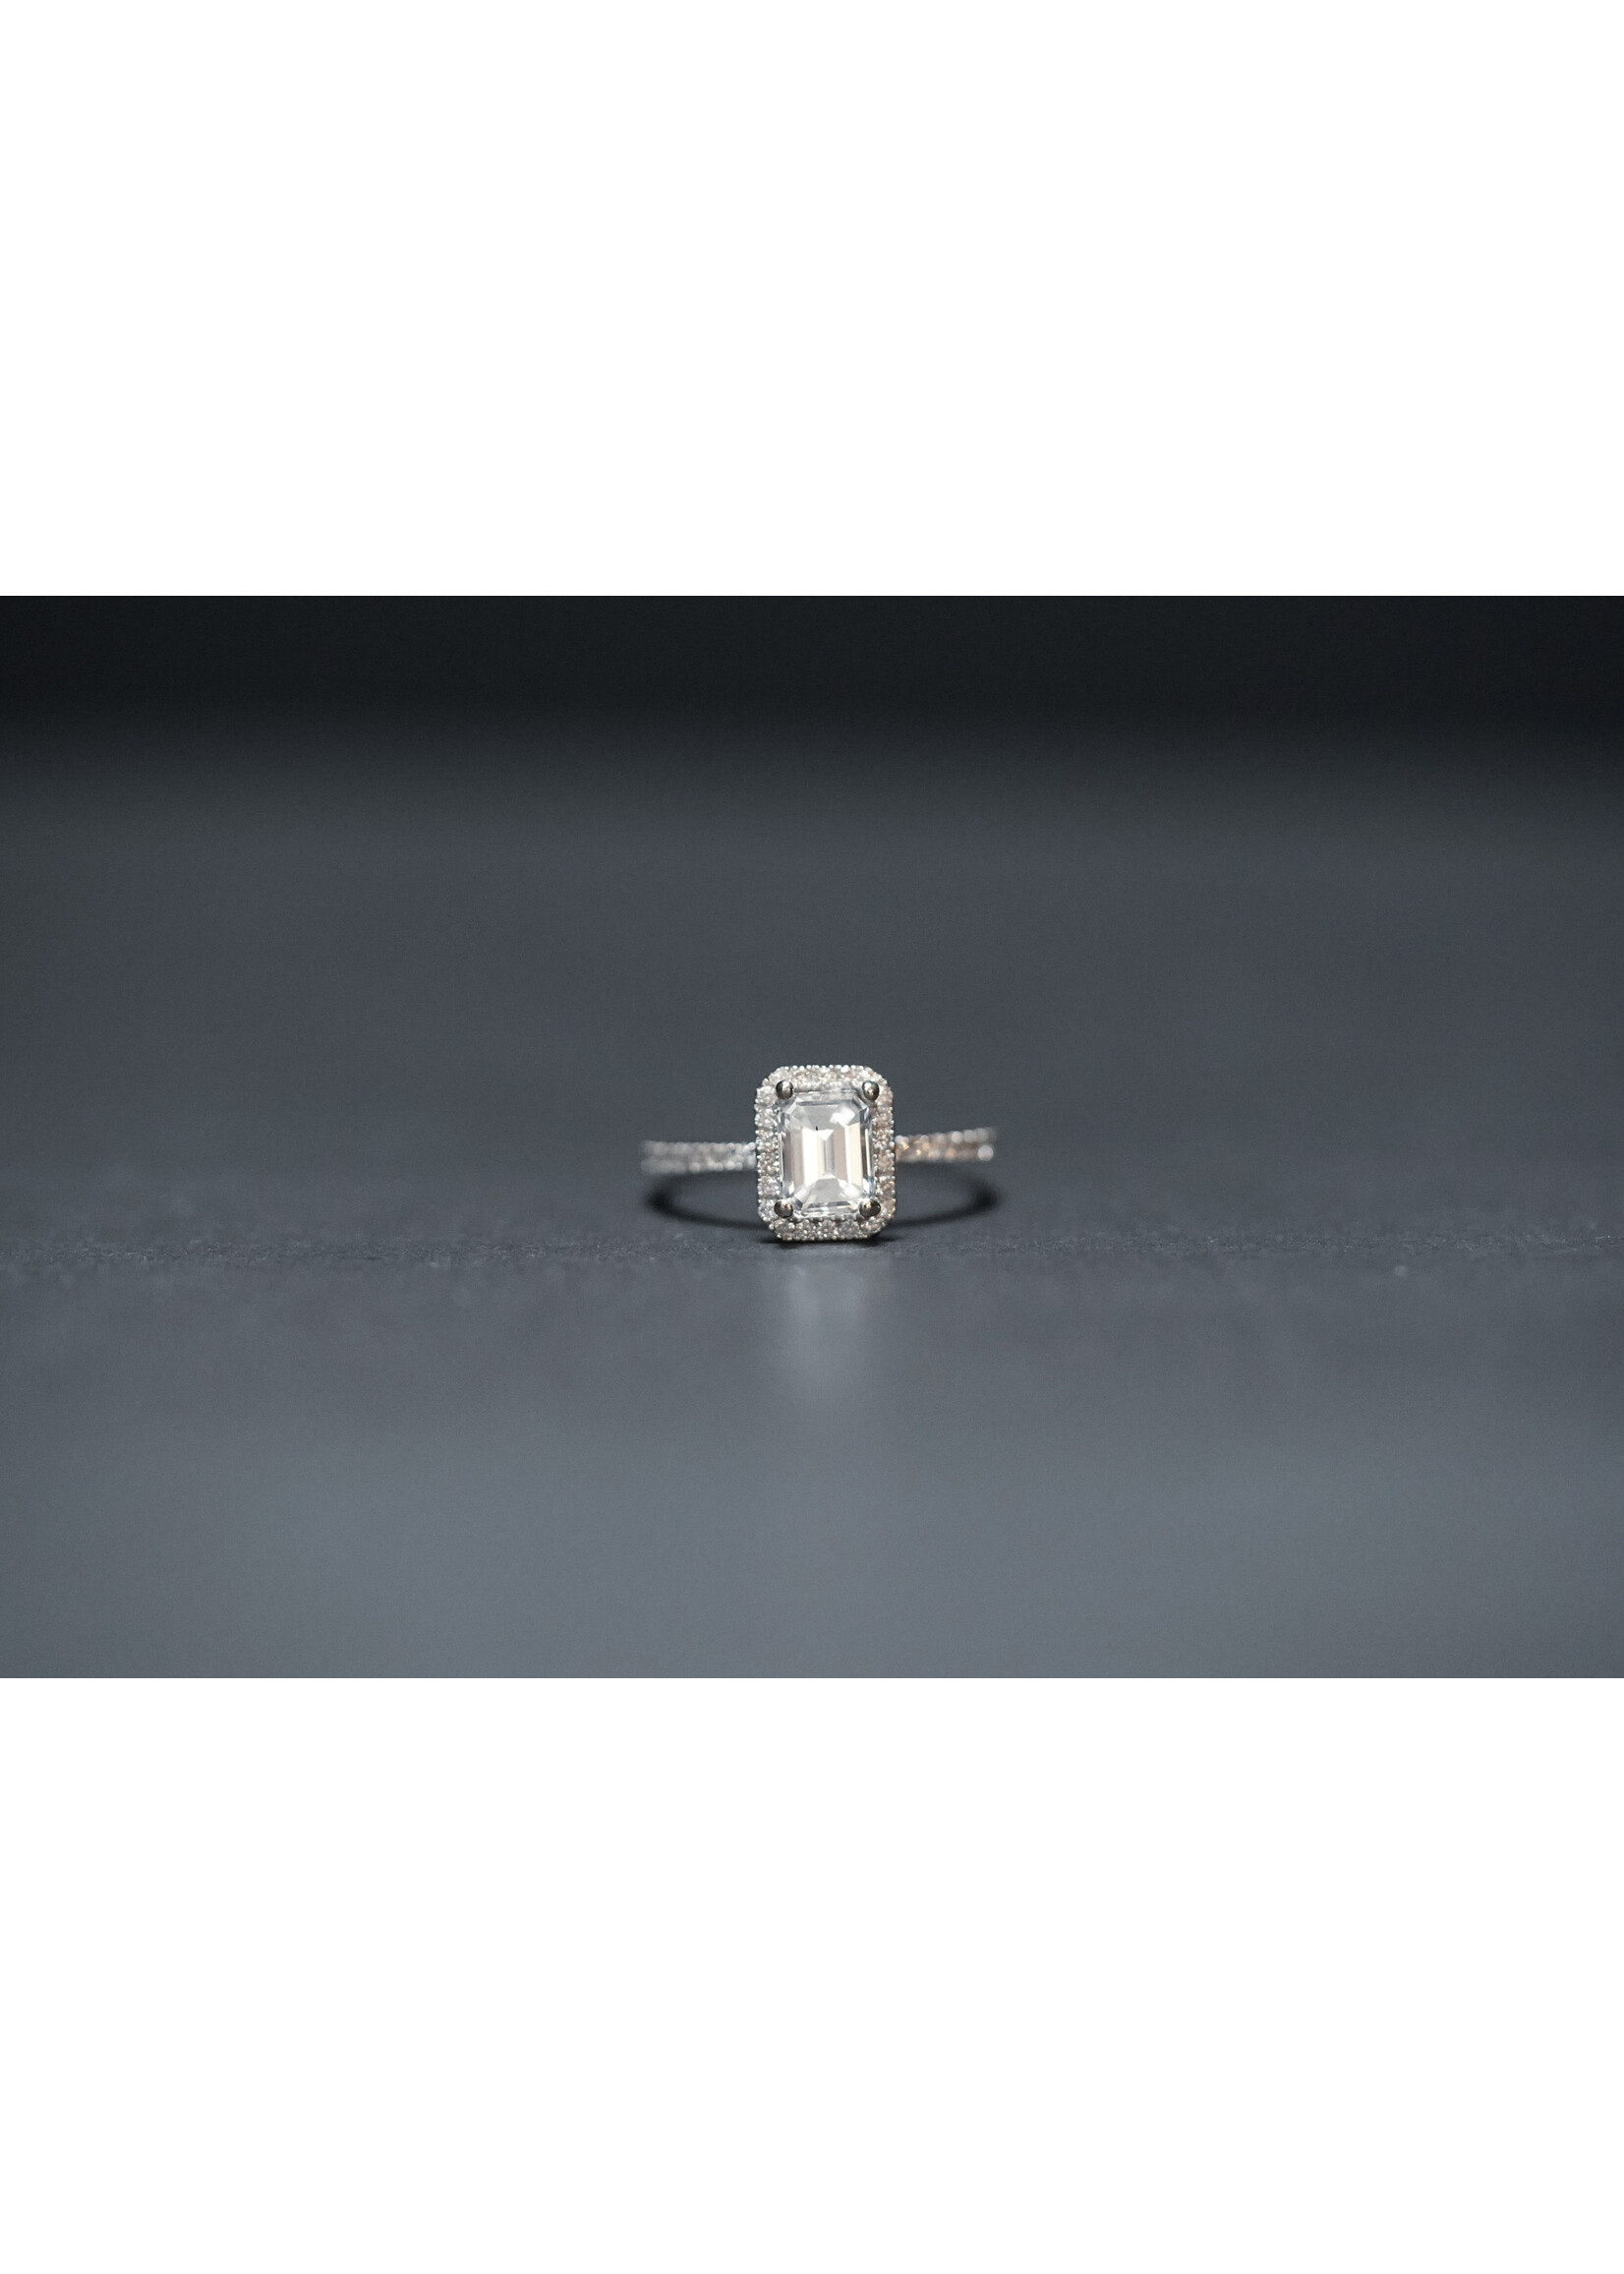 14KW 2.00g 1.25ctw (1.00ctr) E/VS1 GIA Emerald Cut Halo Engagment Ring (size 6.5)